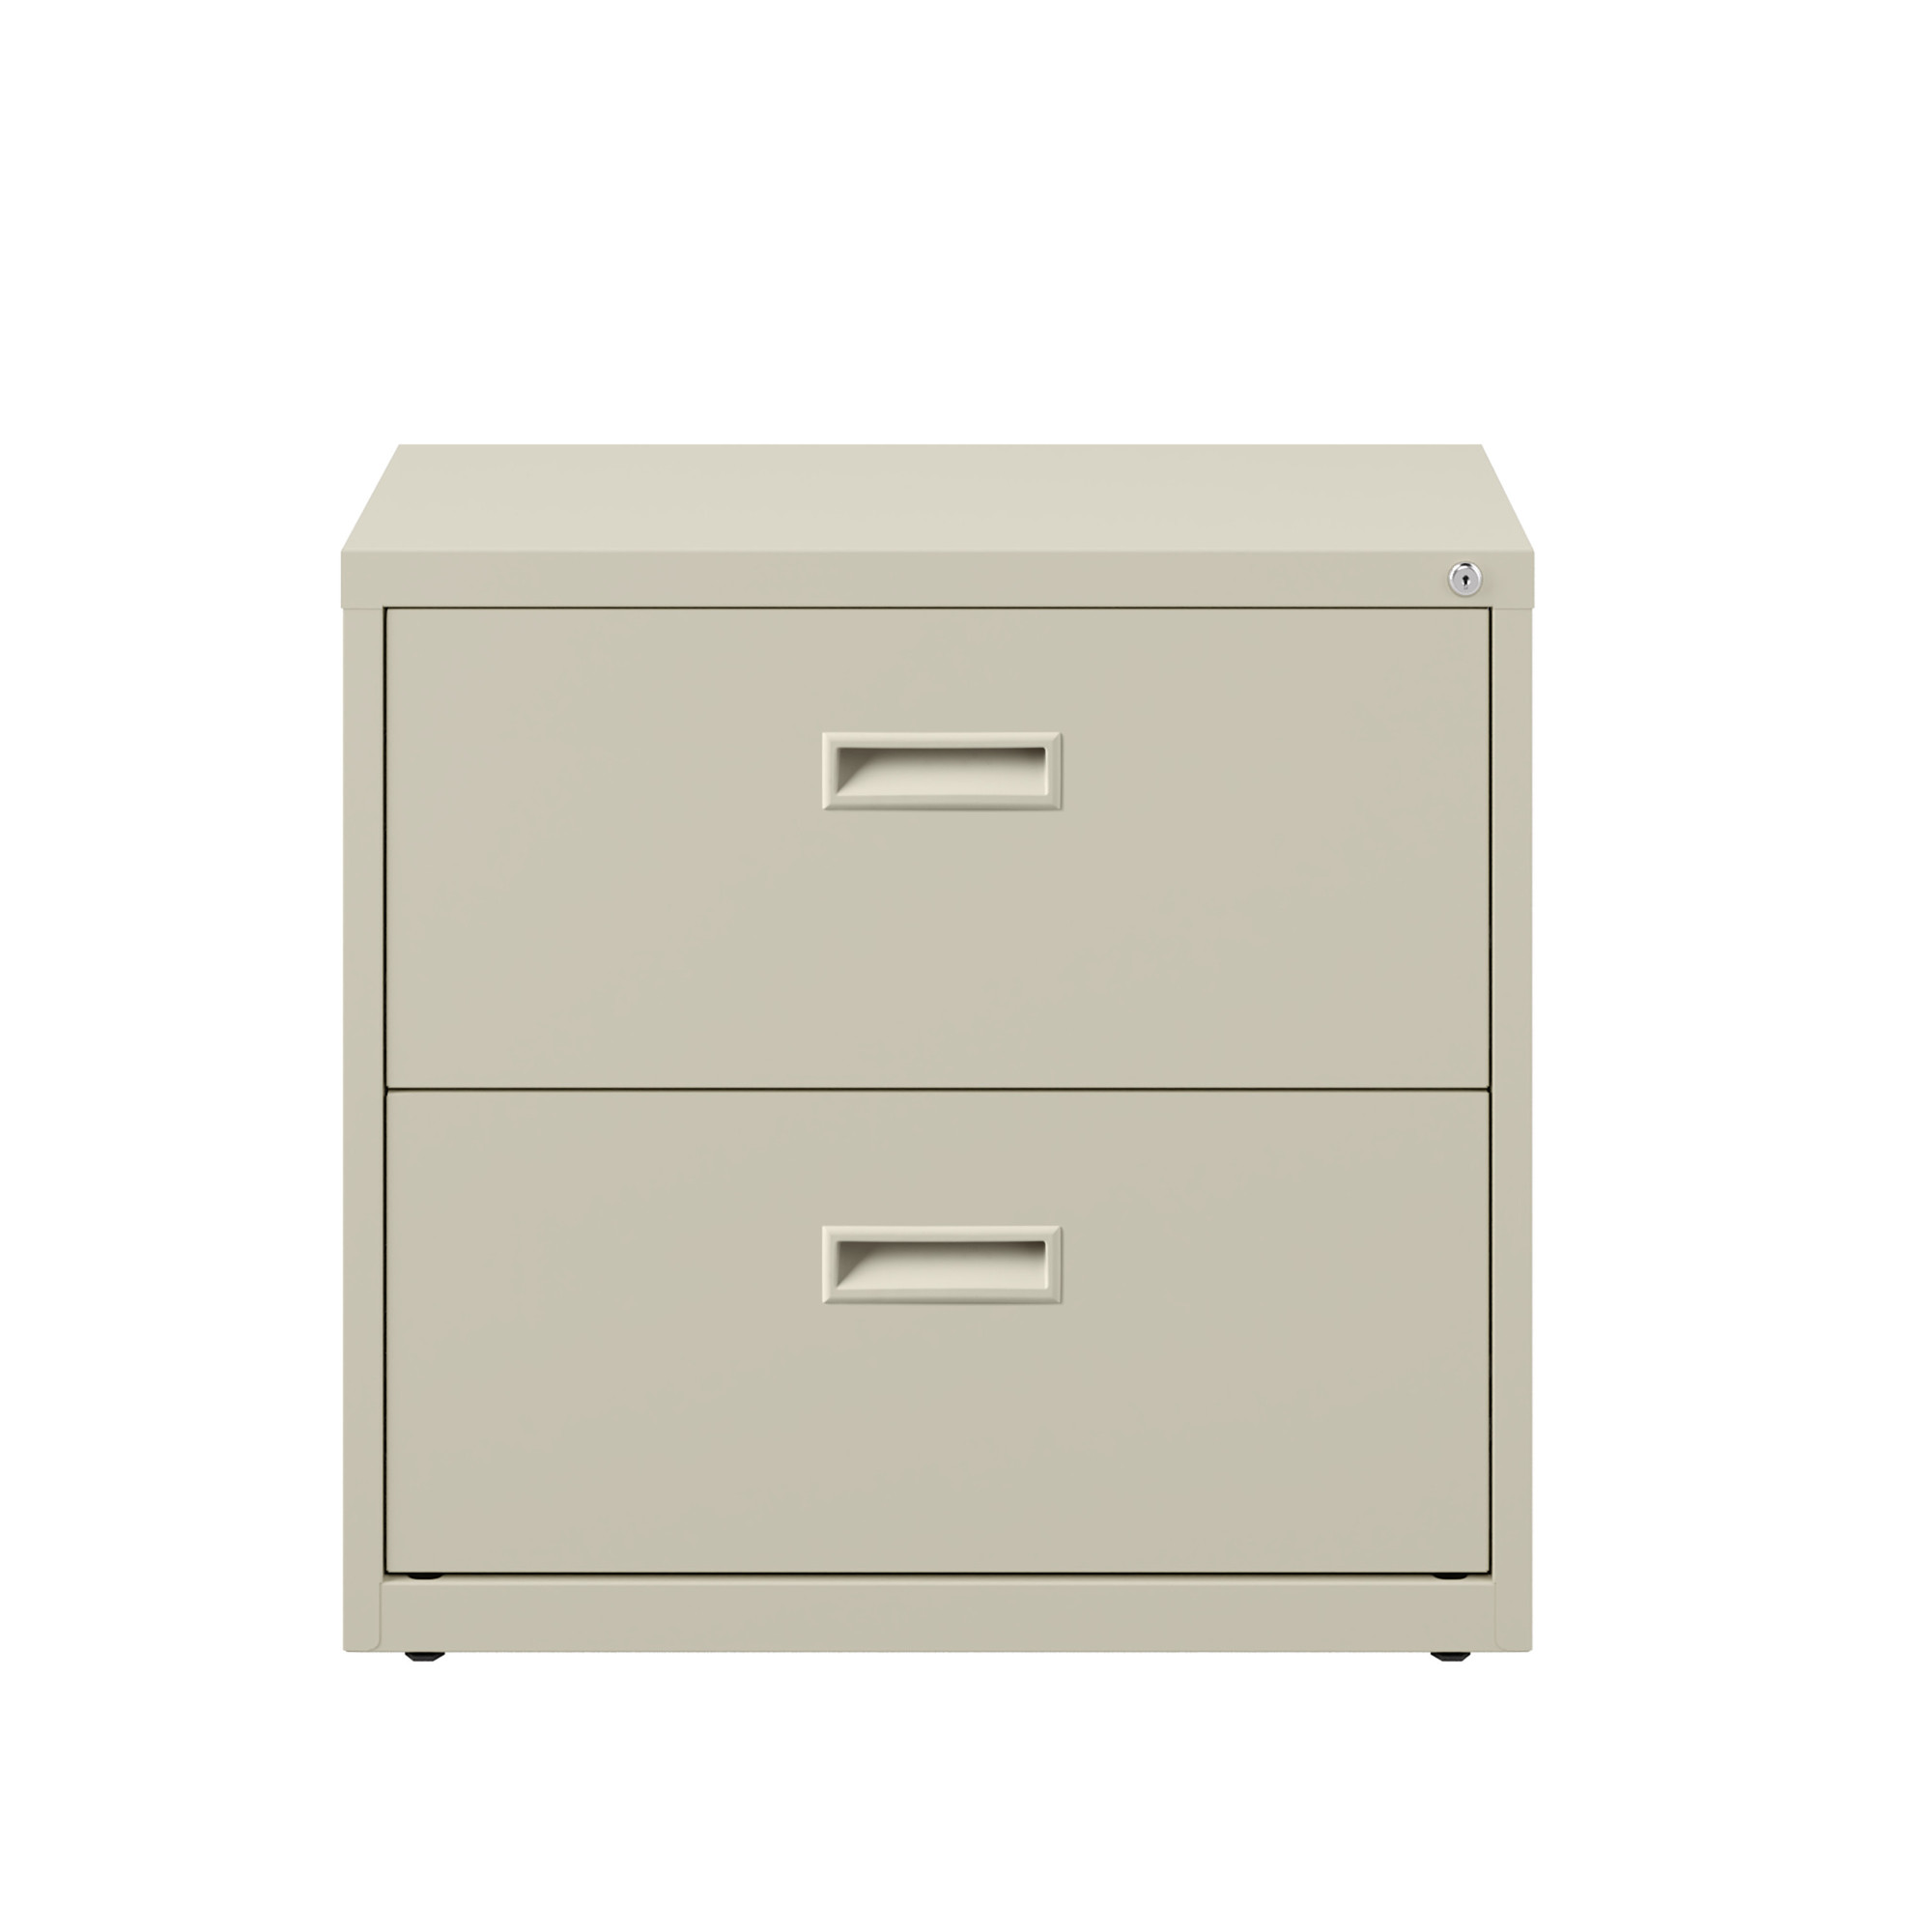 Hirsh Industries, 2 Drawer Lateral File Cabinet, Width 30 in, Depth 17.63 in, Height 27.75 in, Model 19295